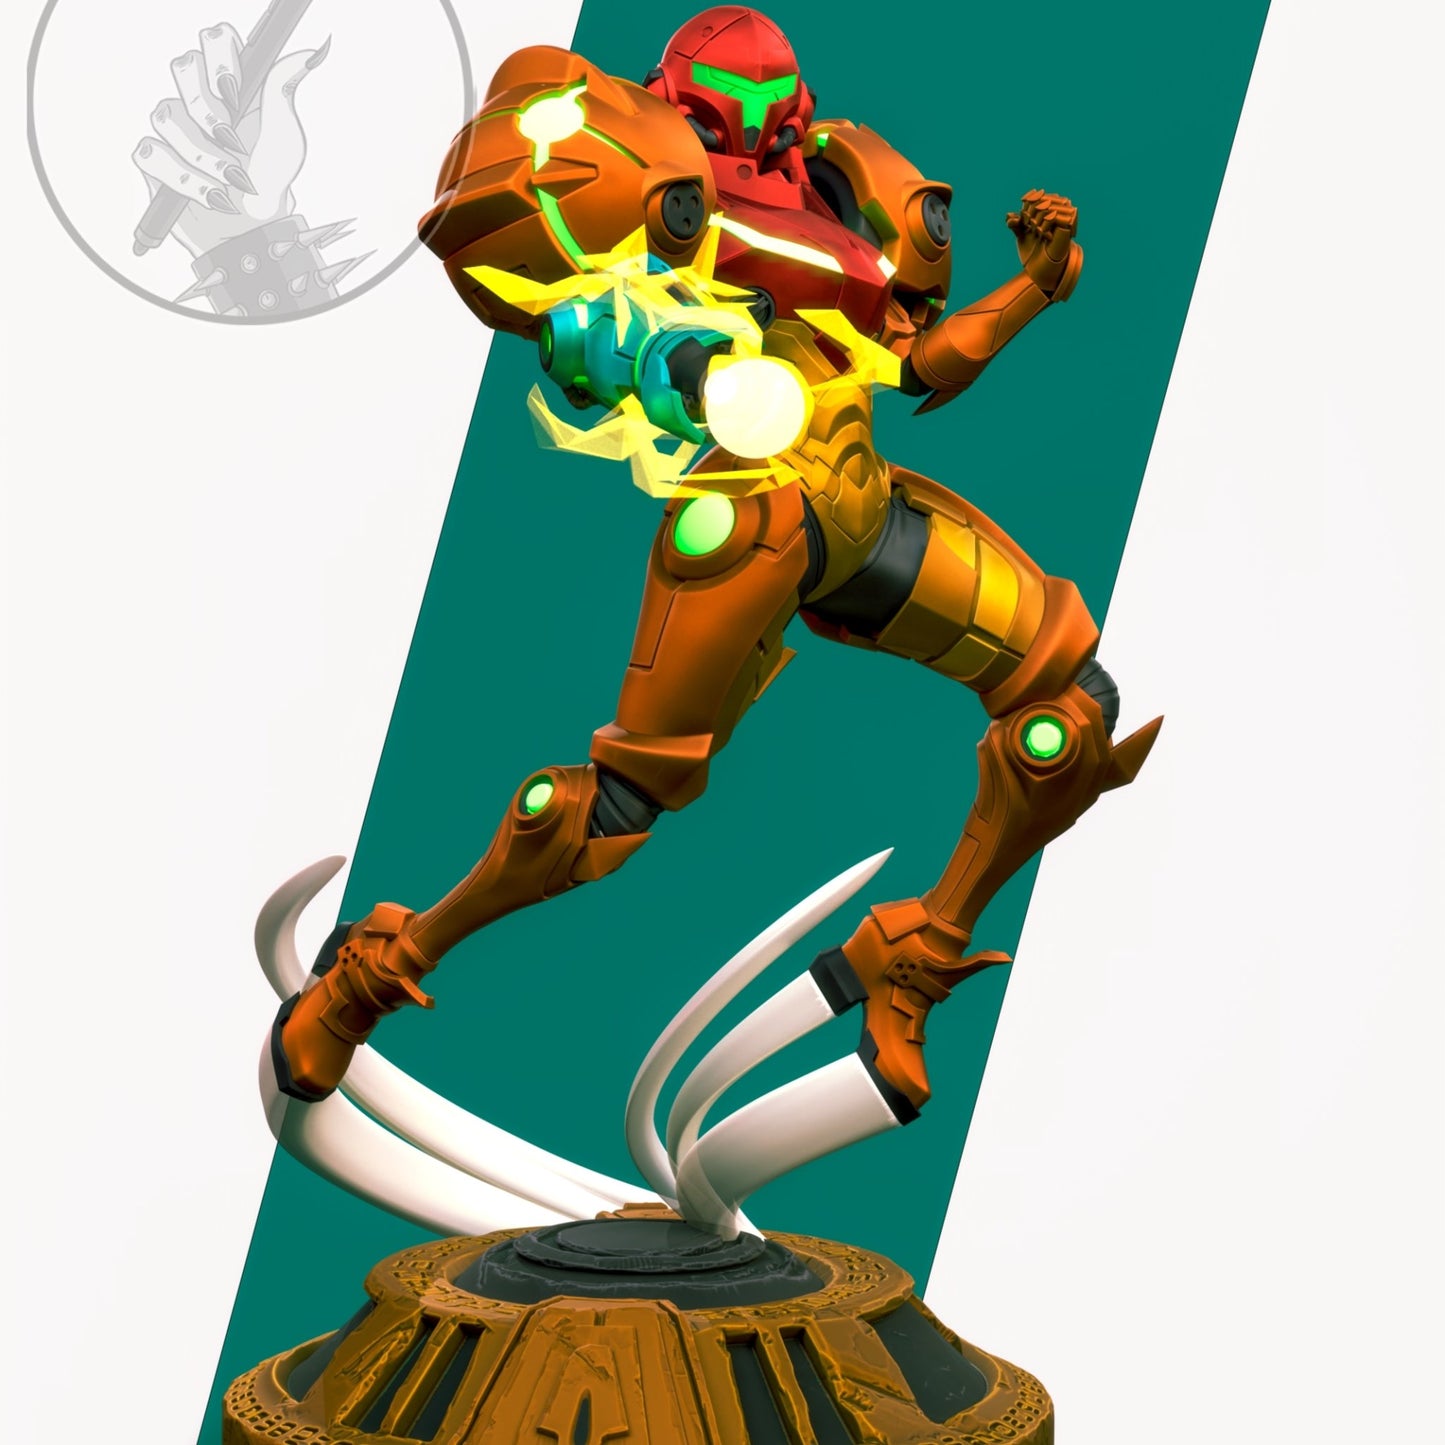 Samus Aran 3D printed miniatures figurines collectibles and scale models UNPAINTED Fun Art by h3LL creator